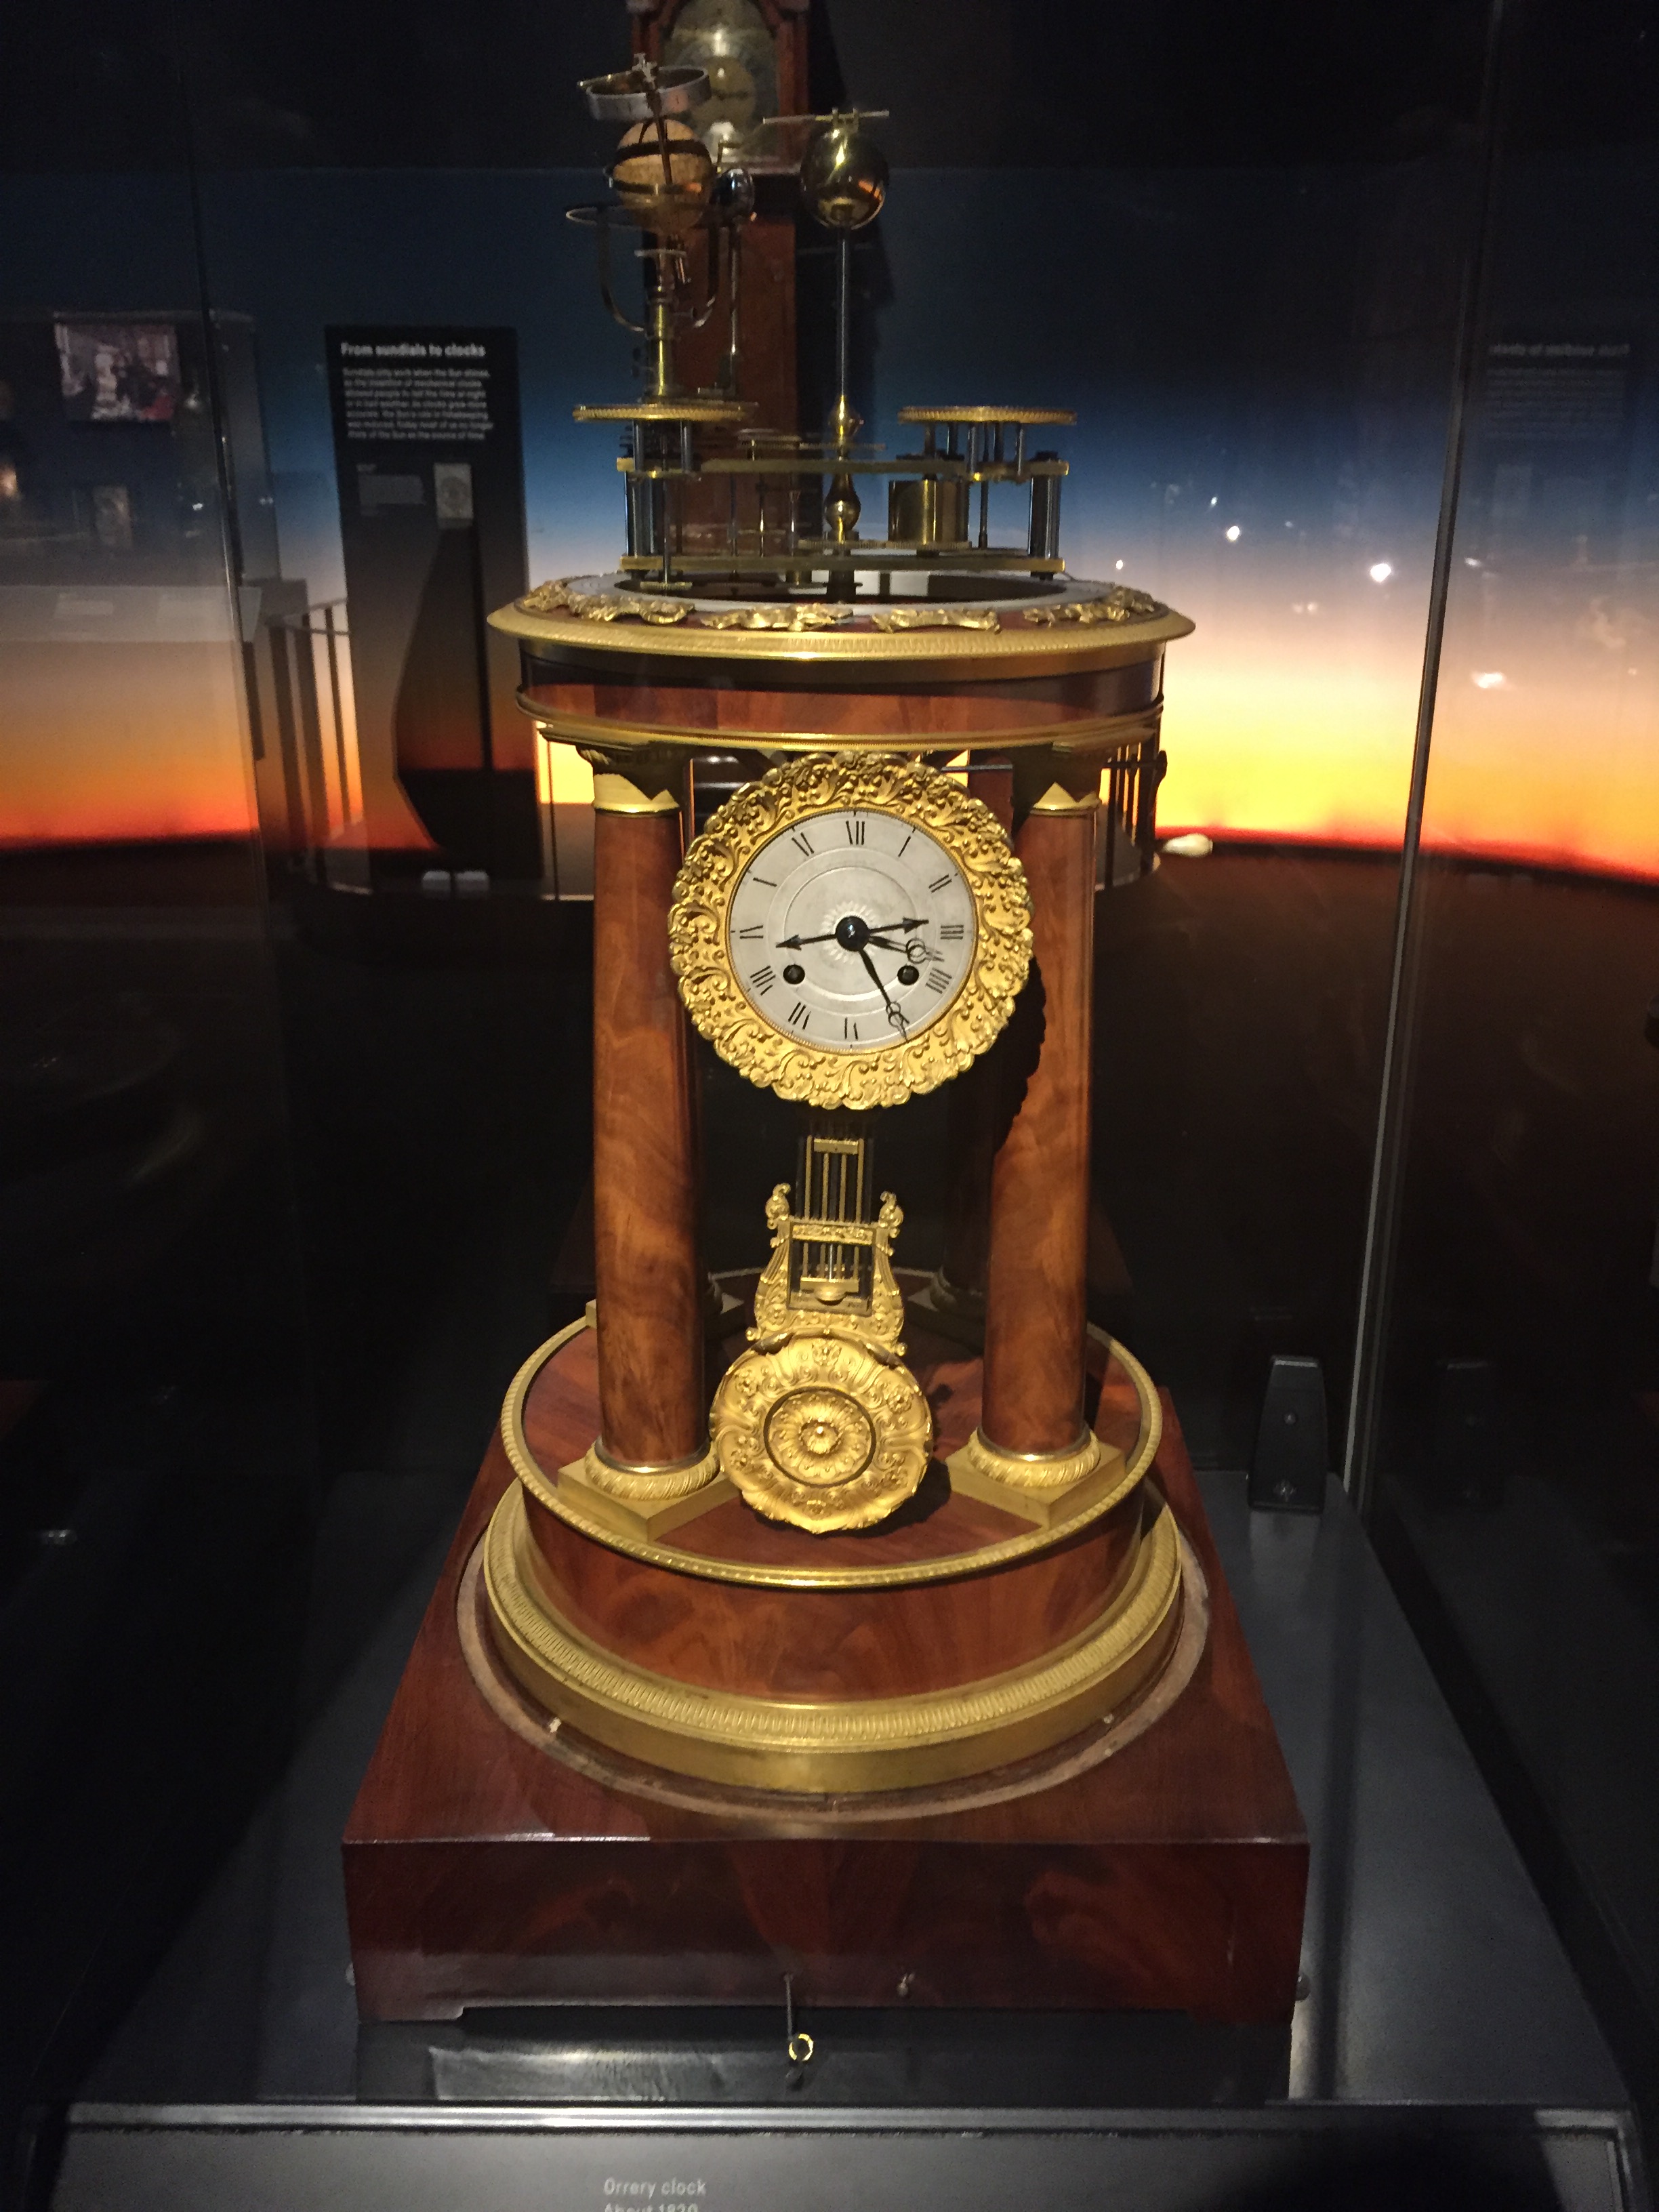 An ornate desk clock with a large round base, a detailed gold border around the face. and a mechanism on the round top that can be used to determine the time using the sun's position.